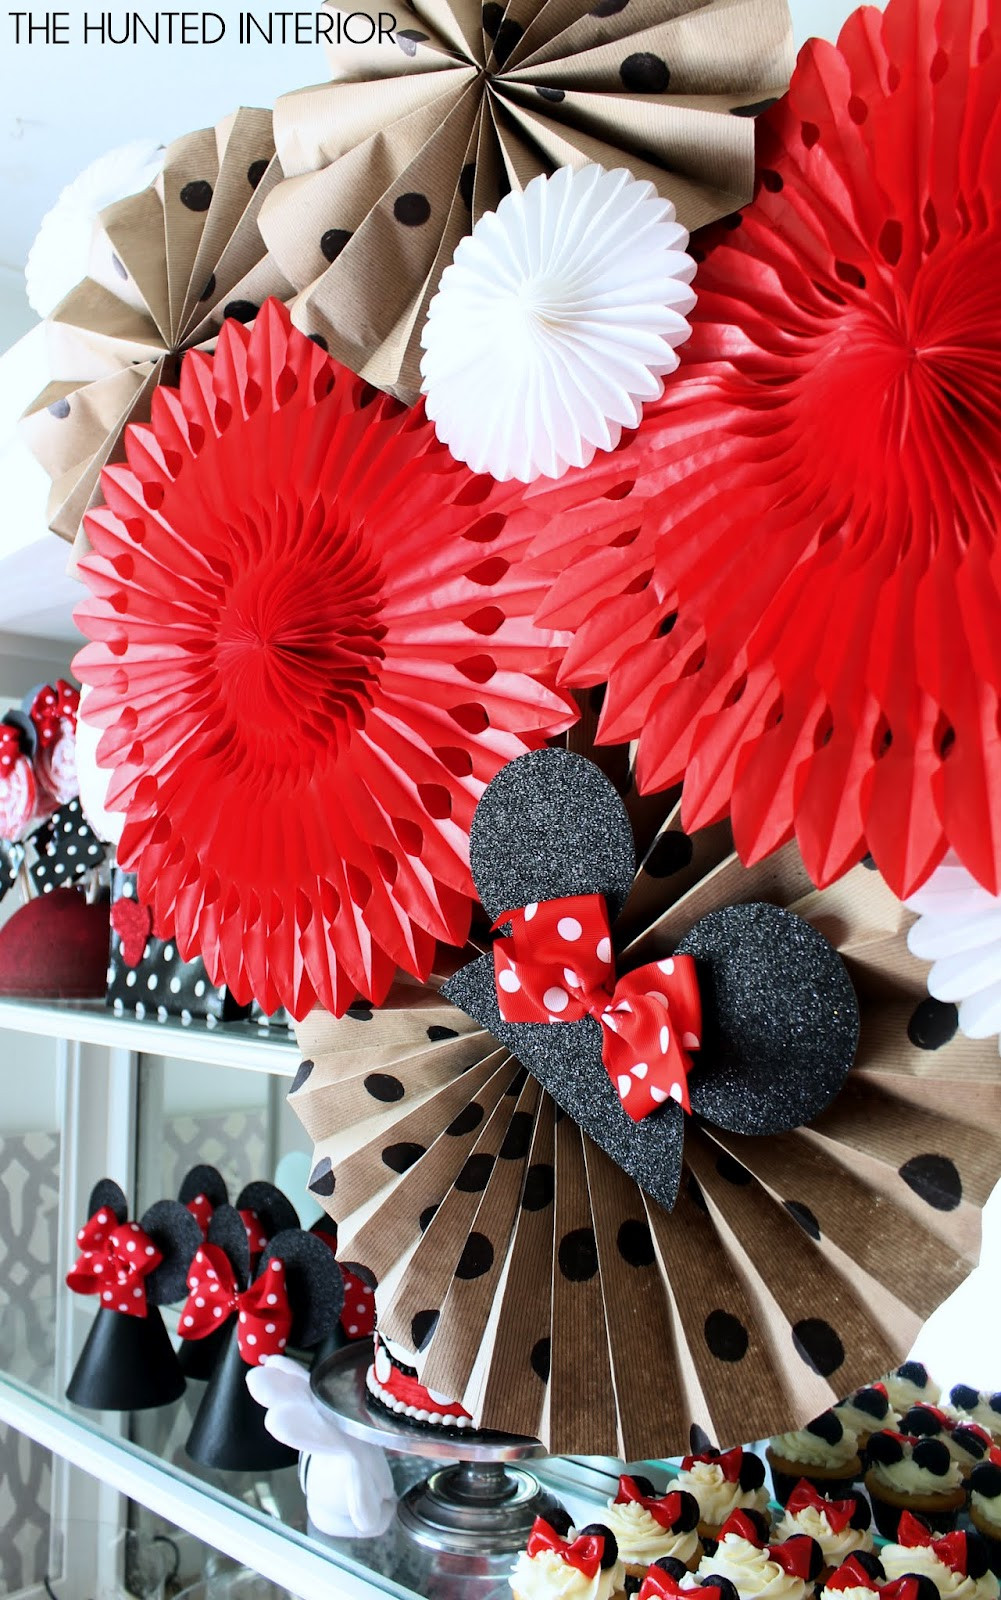 Minnie Birthday Decorations
 hunted interior Minnie Mouse Birthday Party